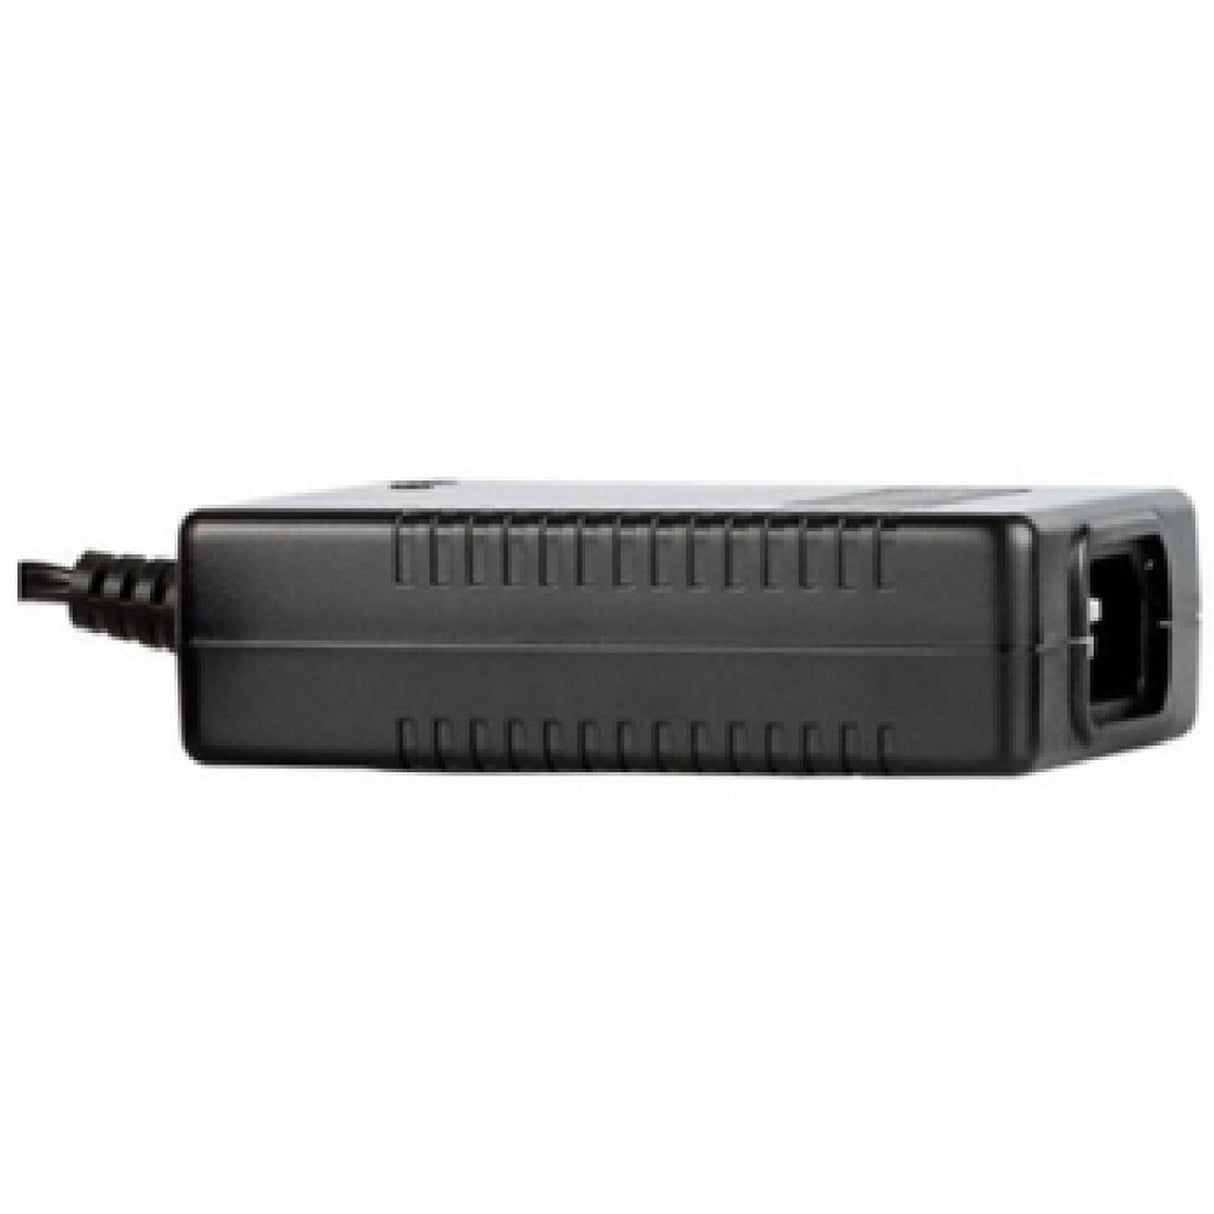 Pro Intercom ECADAPTER | AD2410 AC to DC Adapter with Line Cord